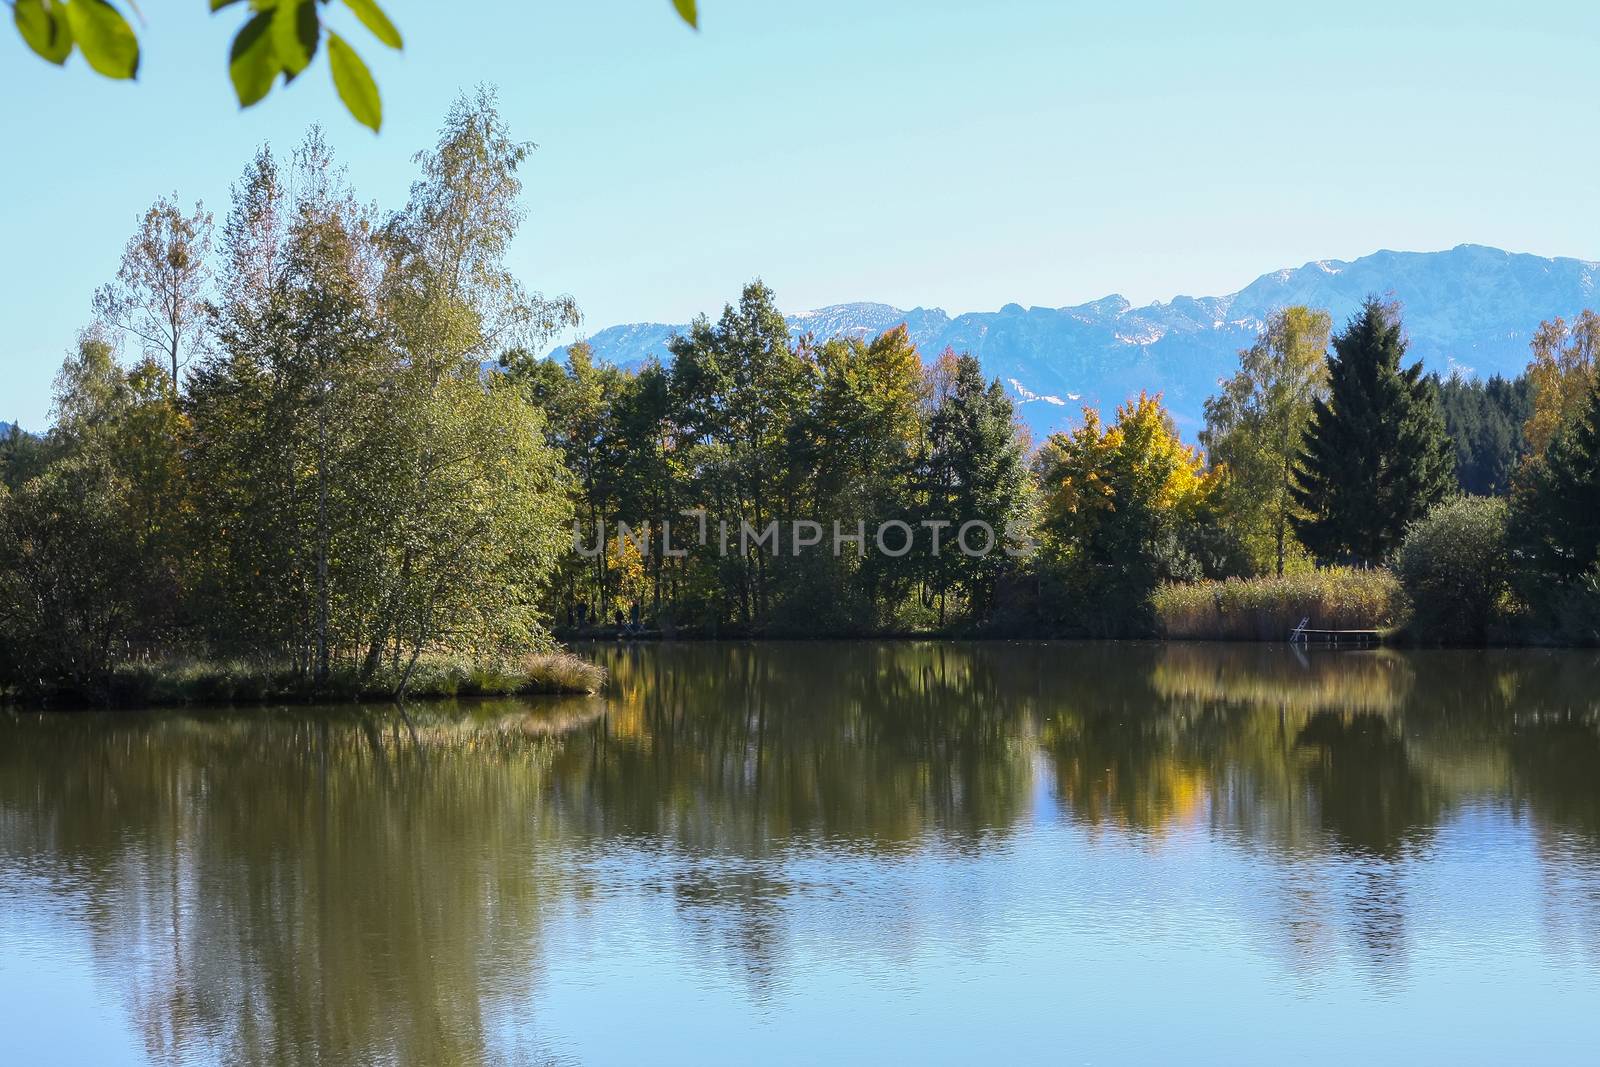 A photography of a lake and autumn trees